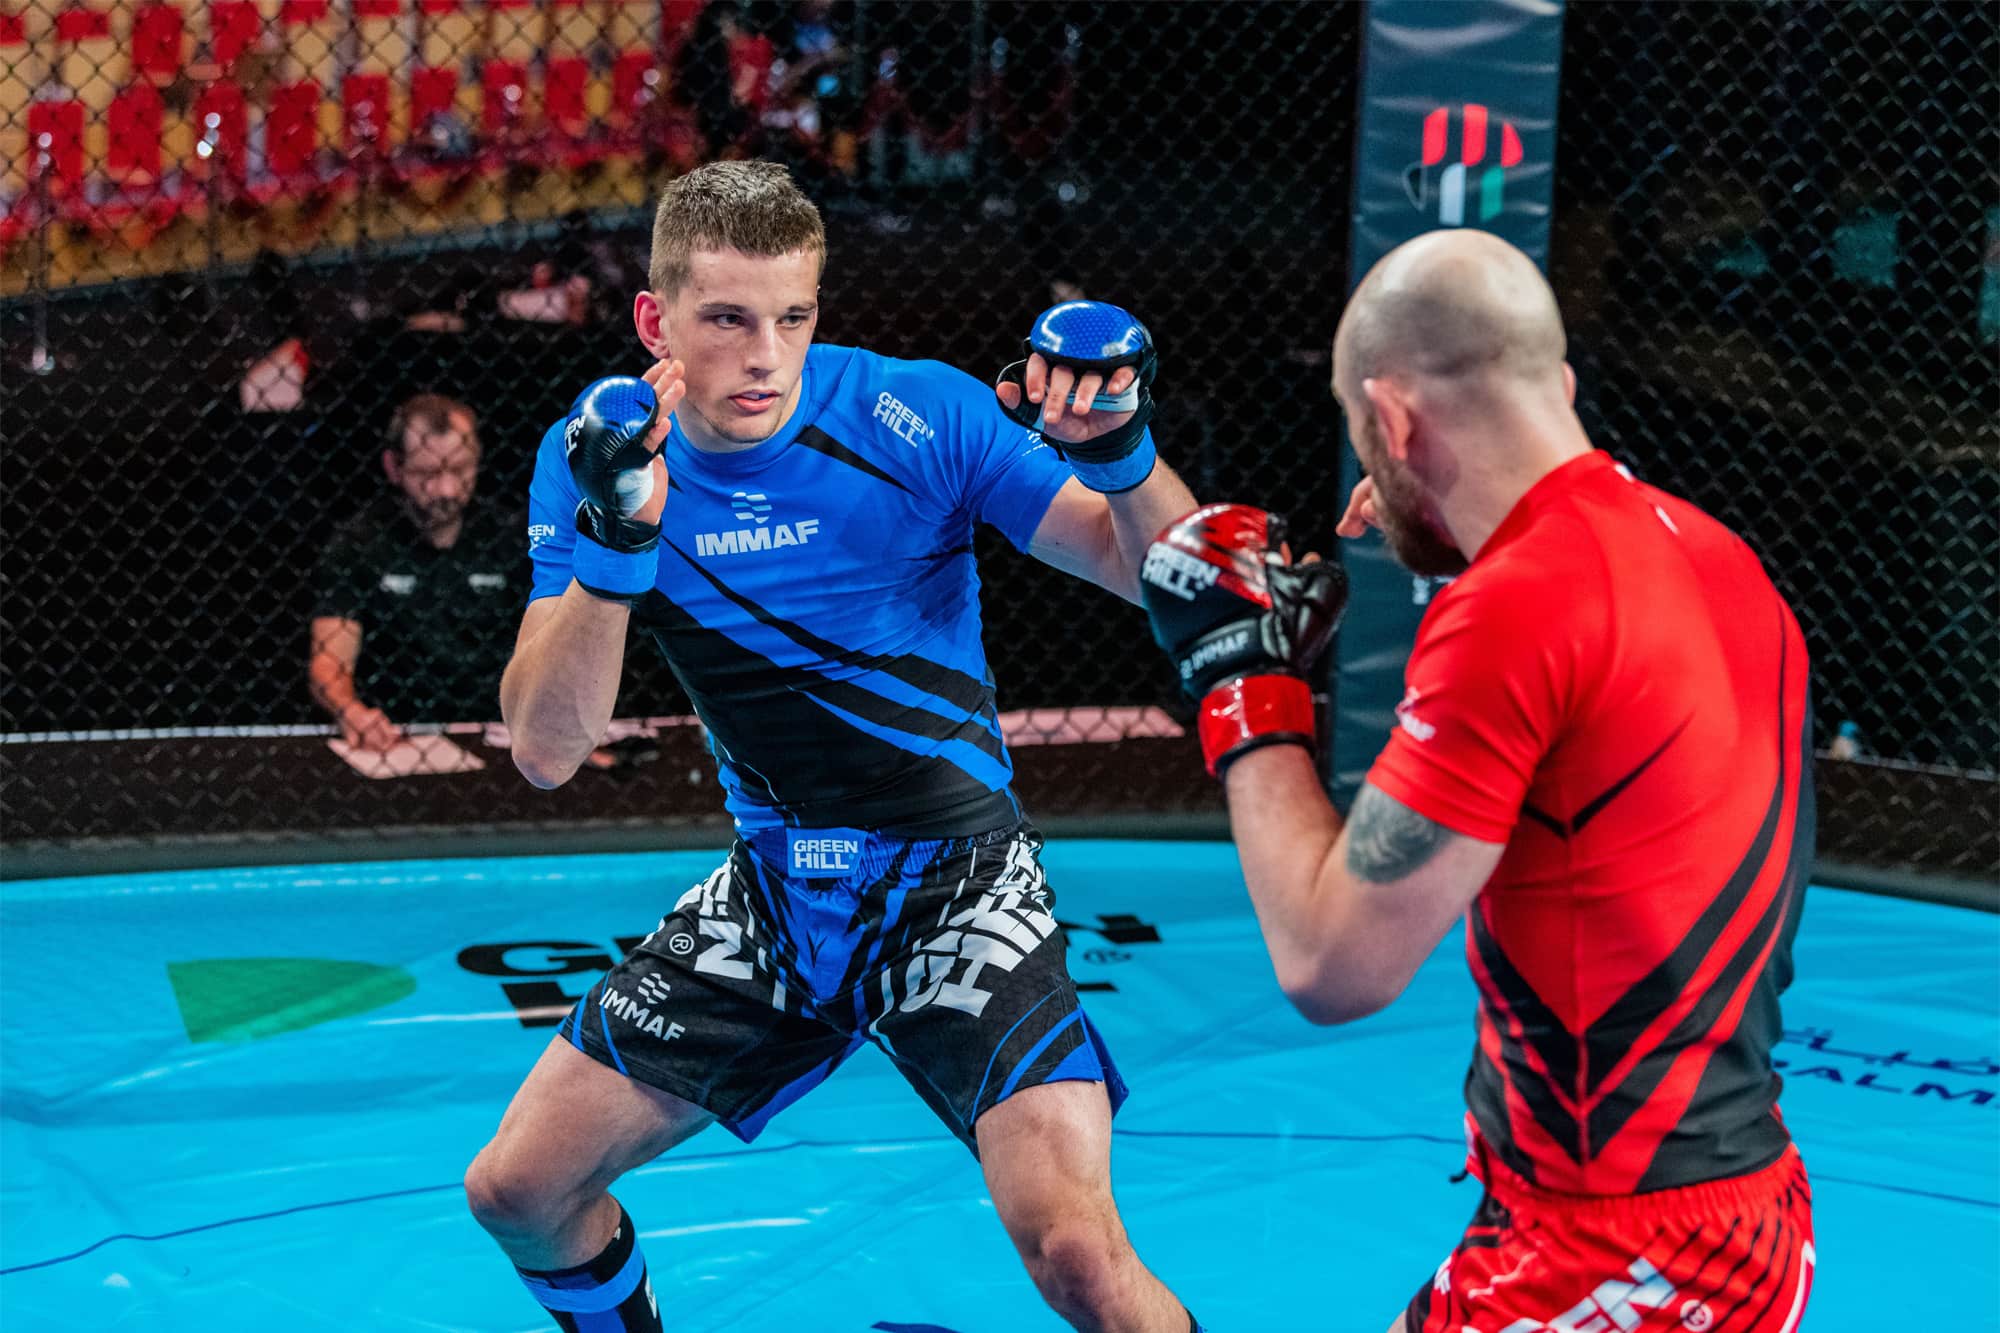 IMMAF newcomer Fergus Jenkins dominates en route to World Championship semi-finals